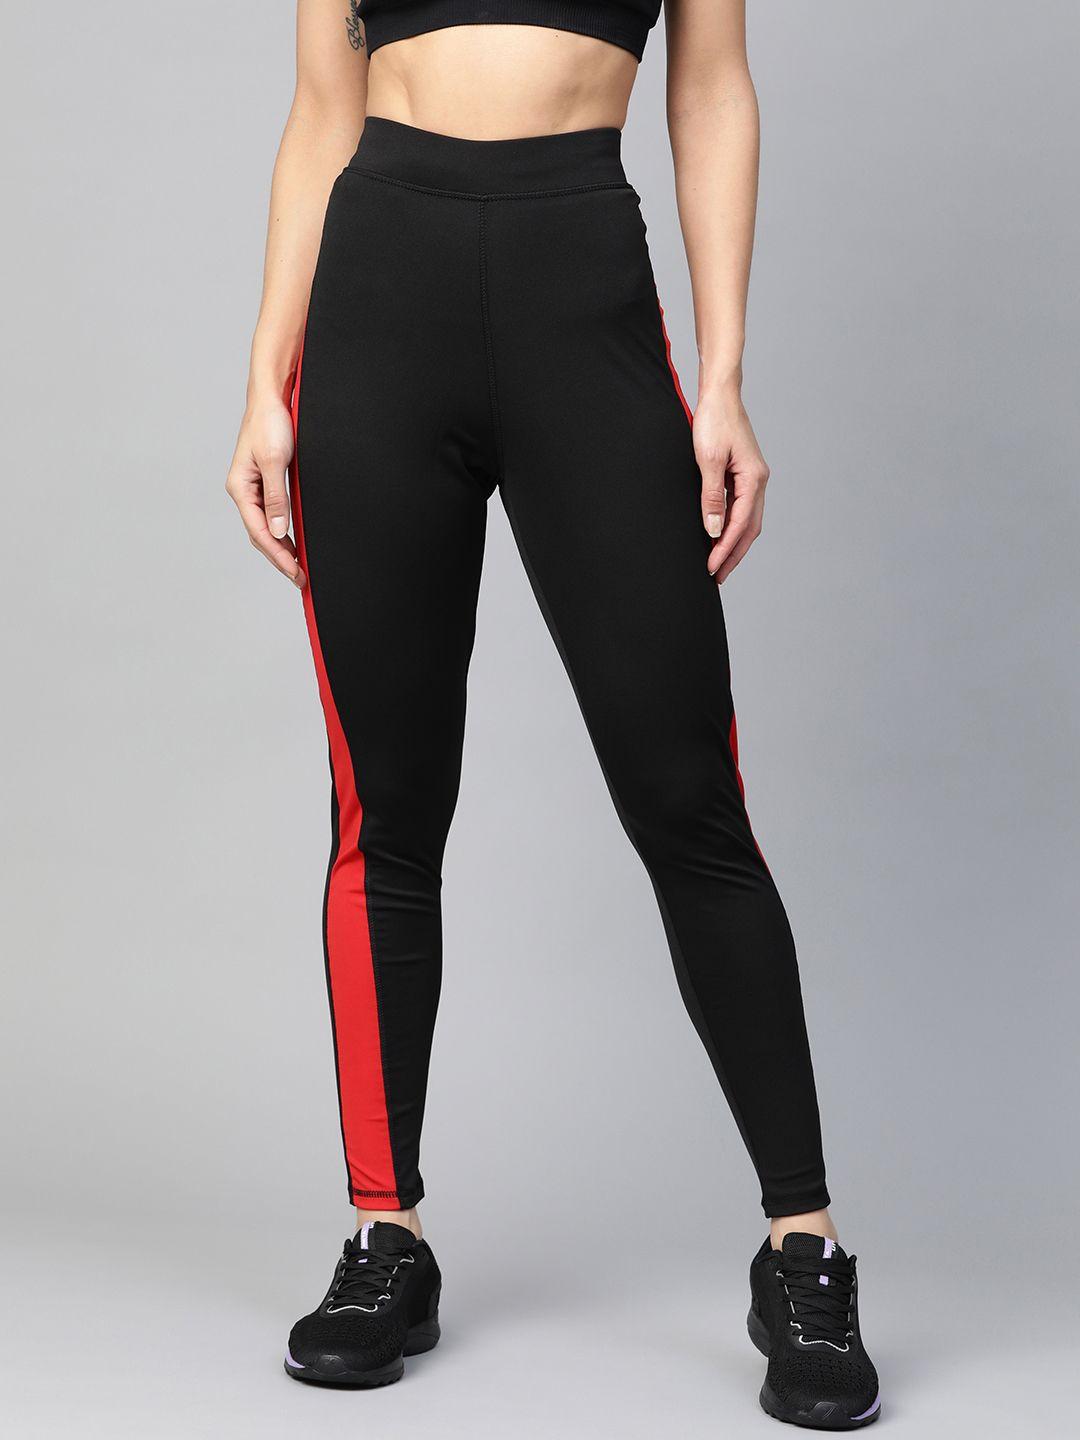 m7-by-metronaut-women-black-high-rise-solid-training-tights